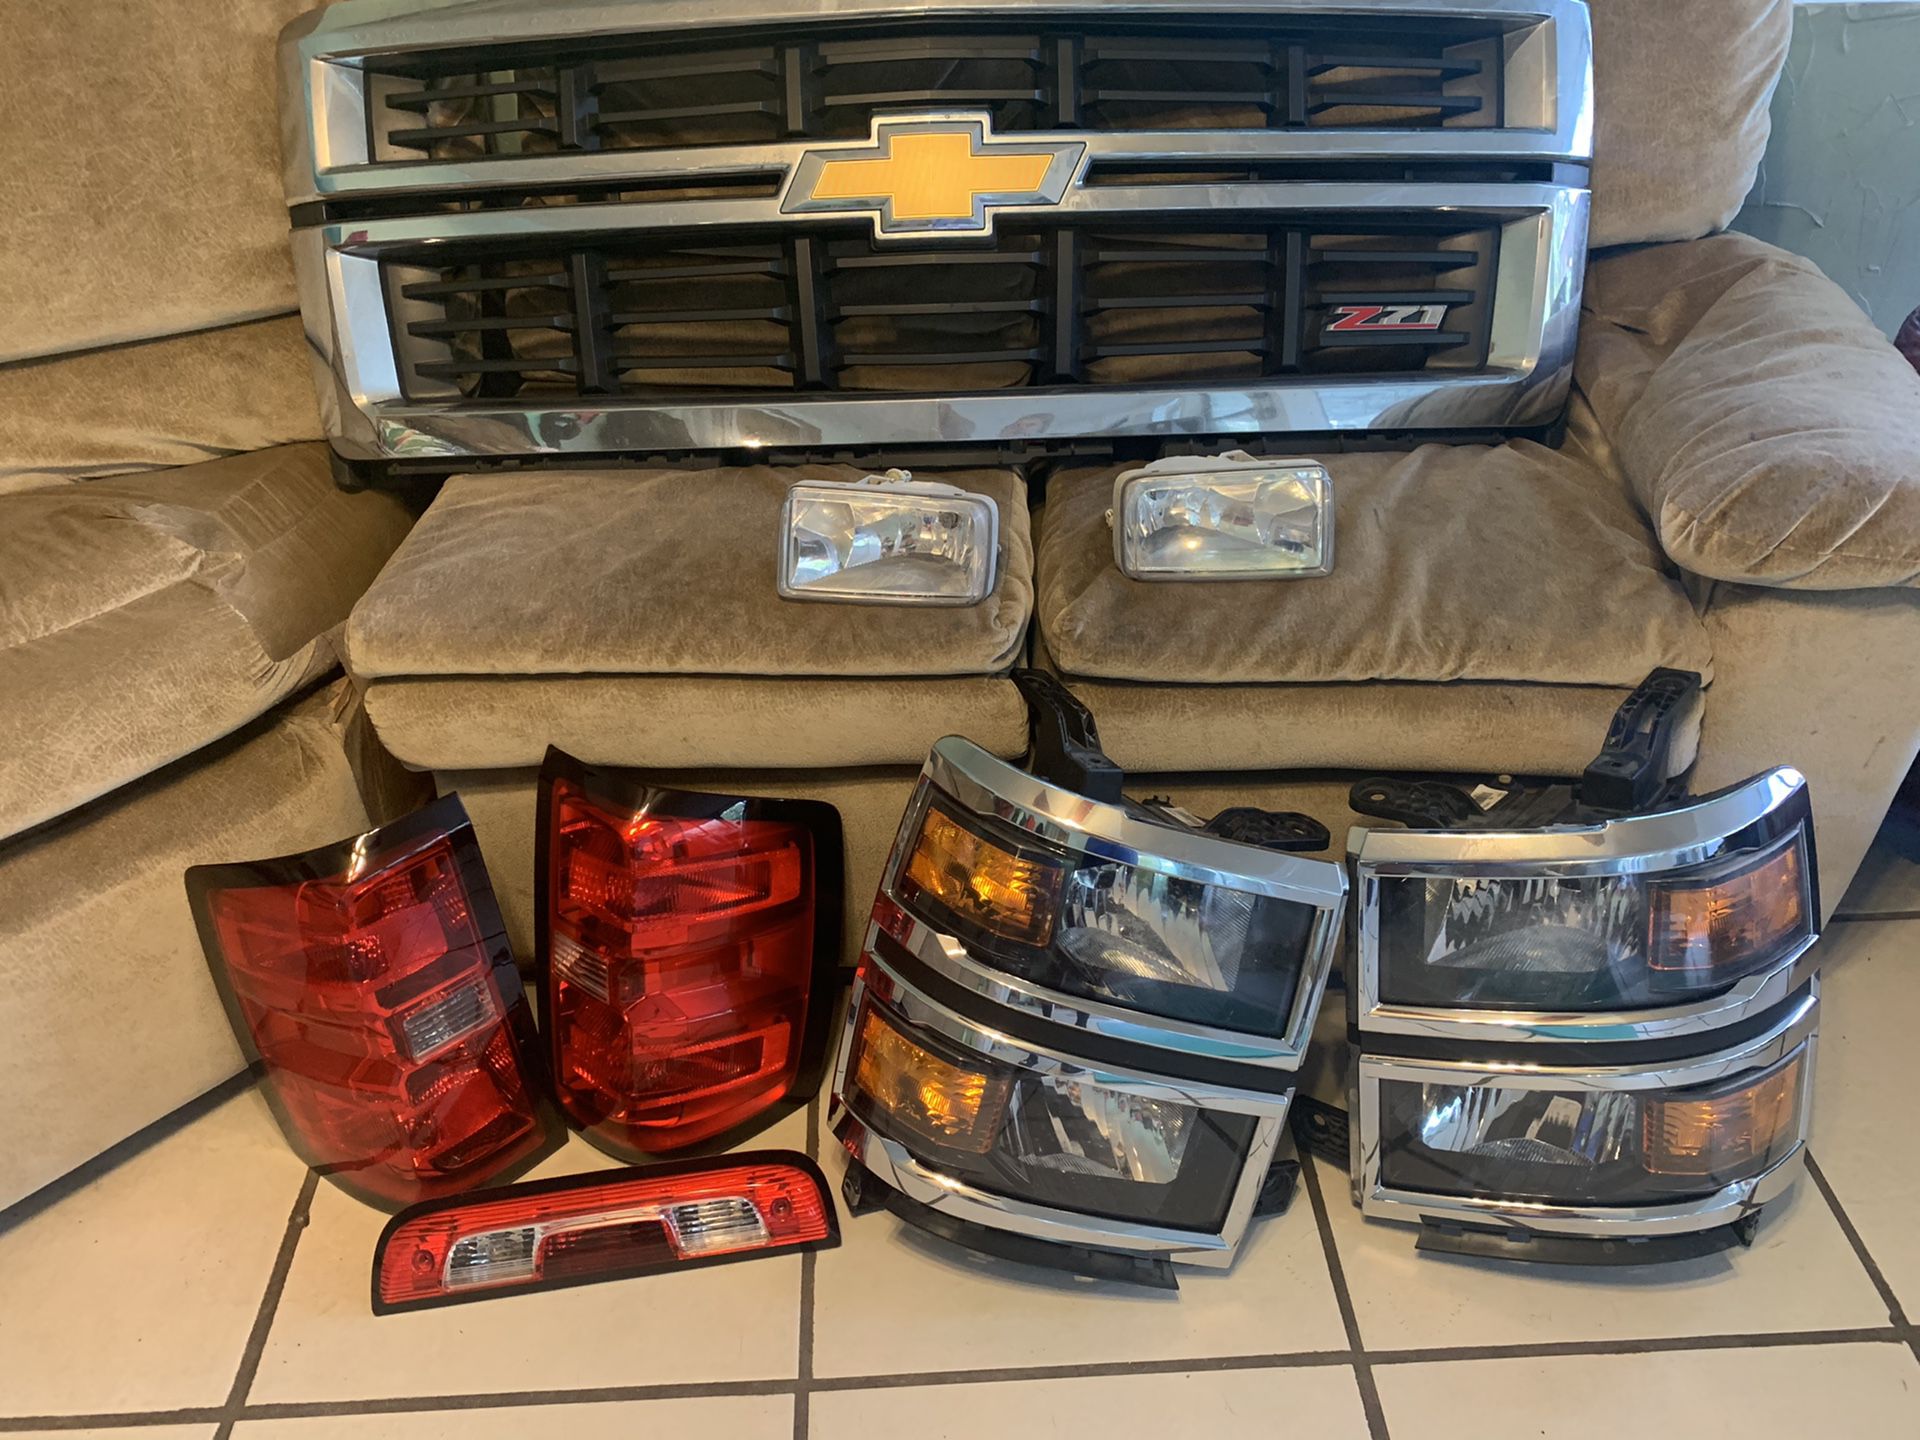 2014 Chevy Silverado grille and lights